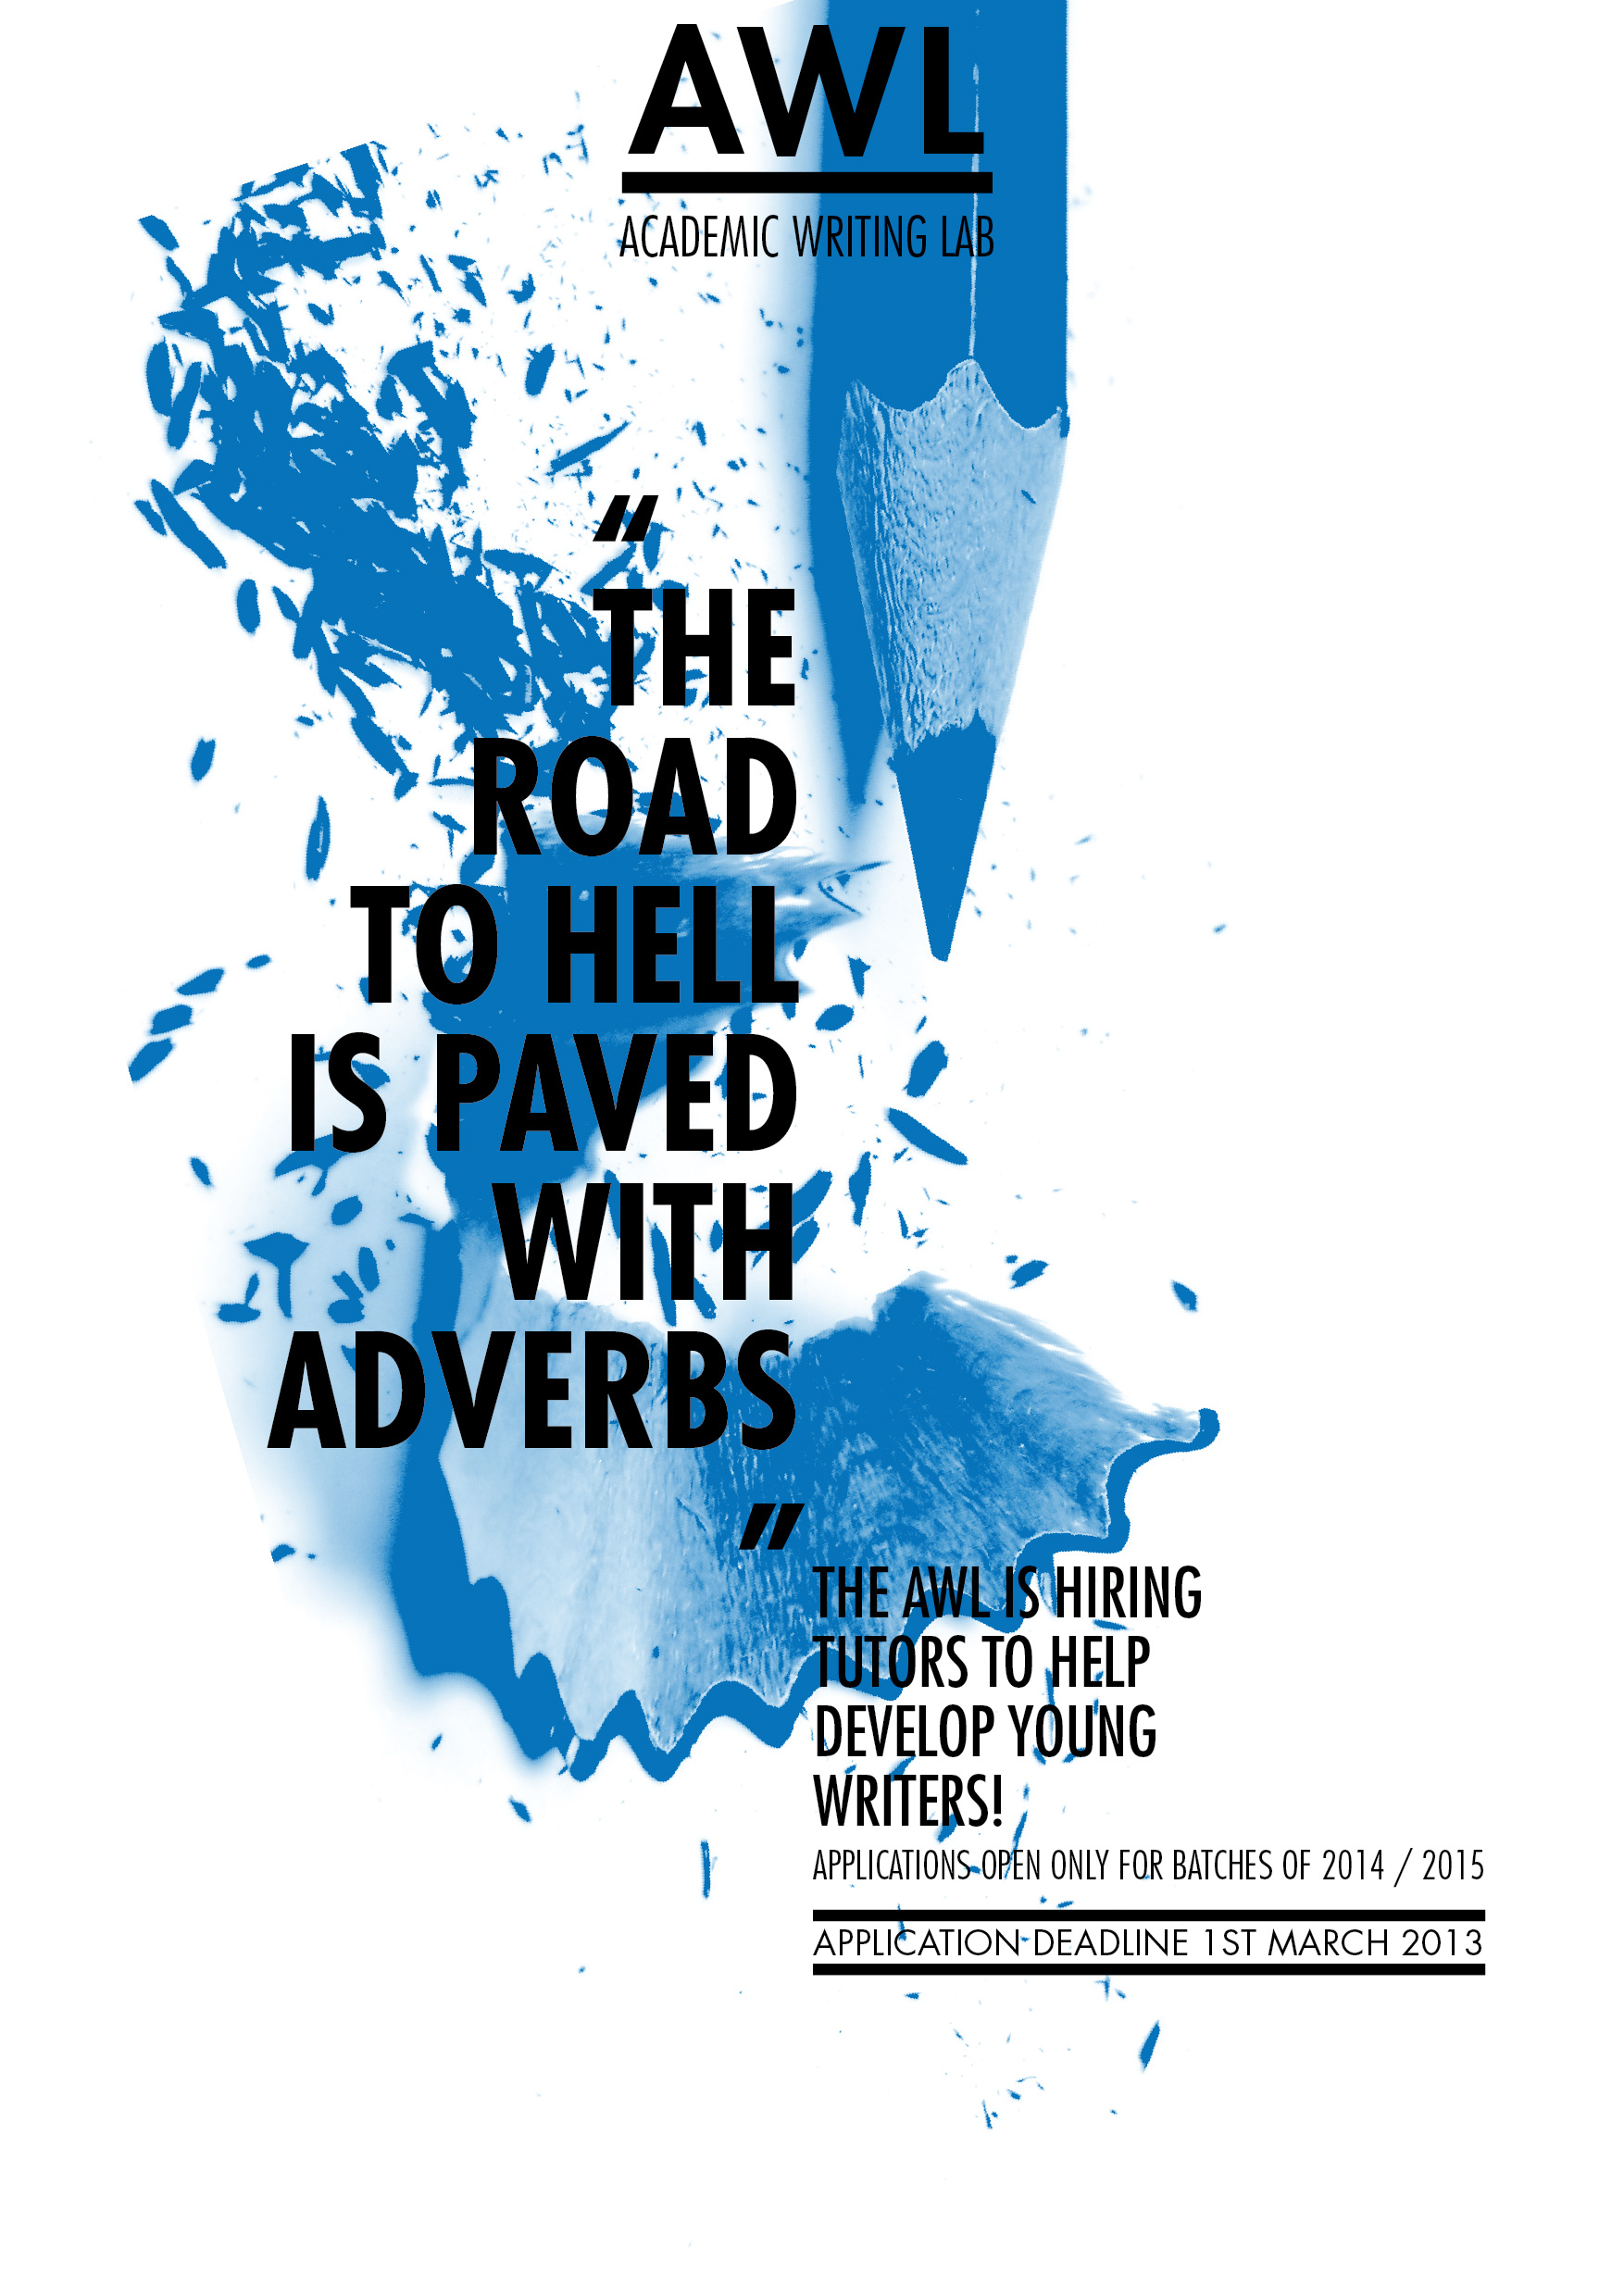 The road to hell is paved with adverbs